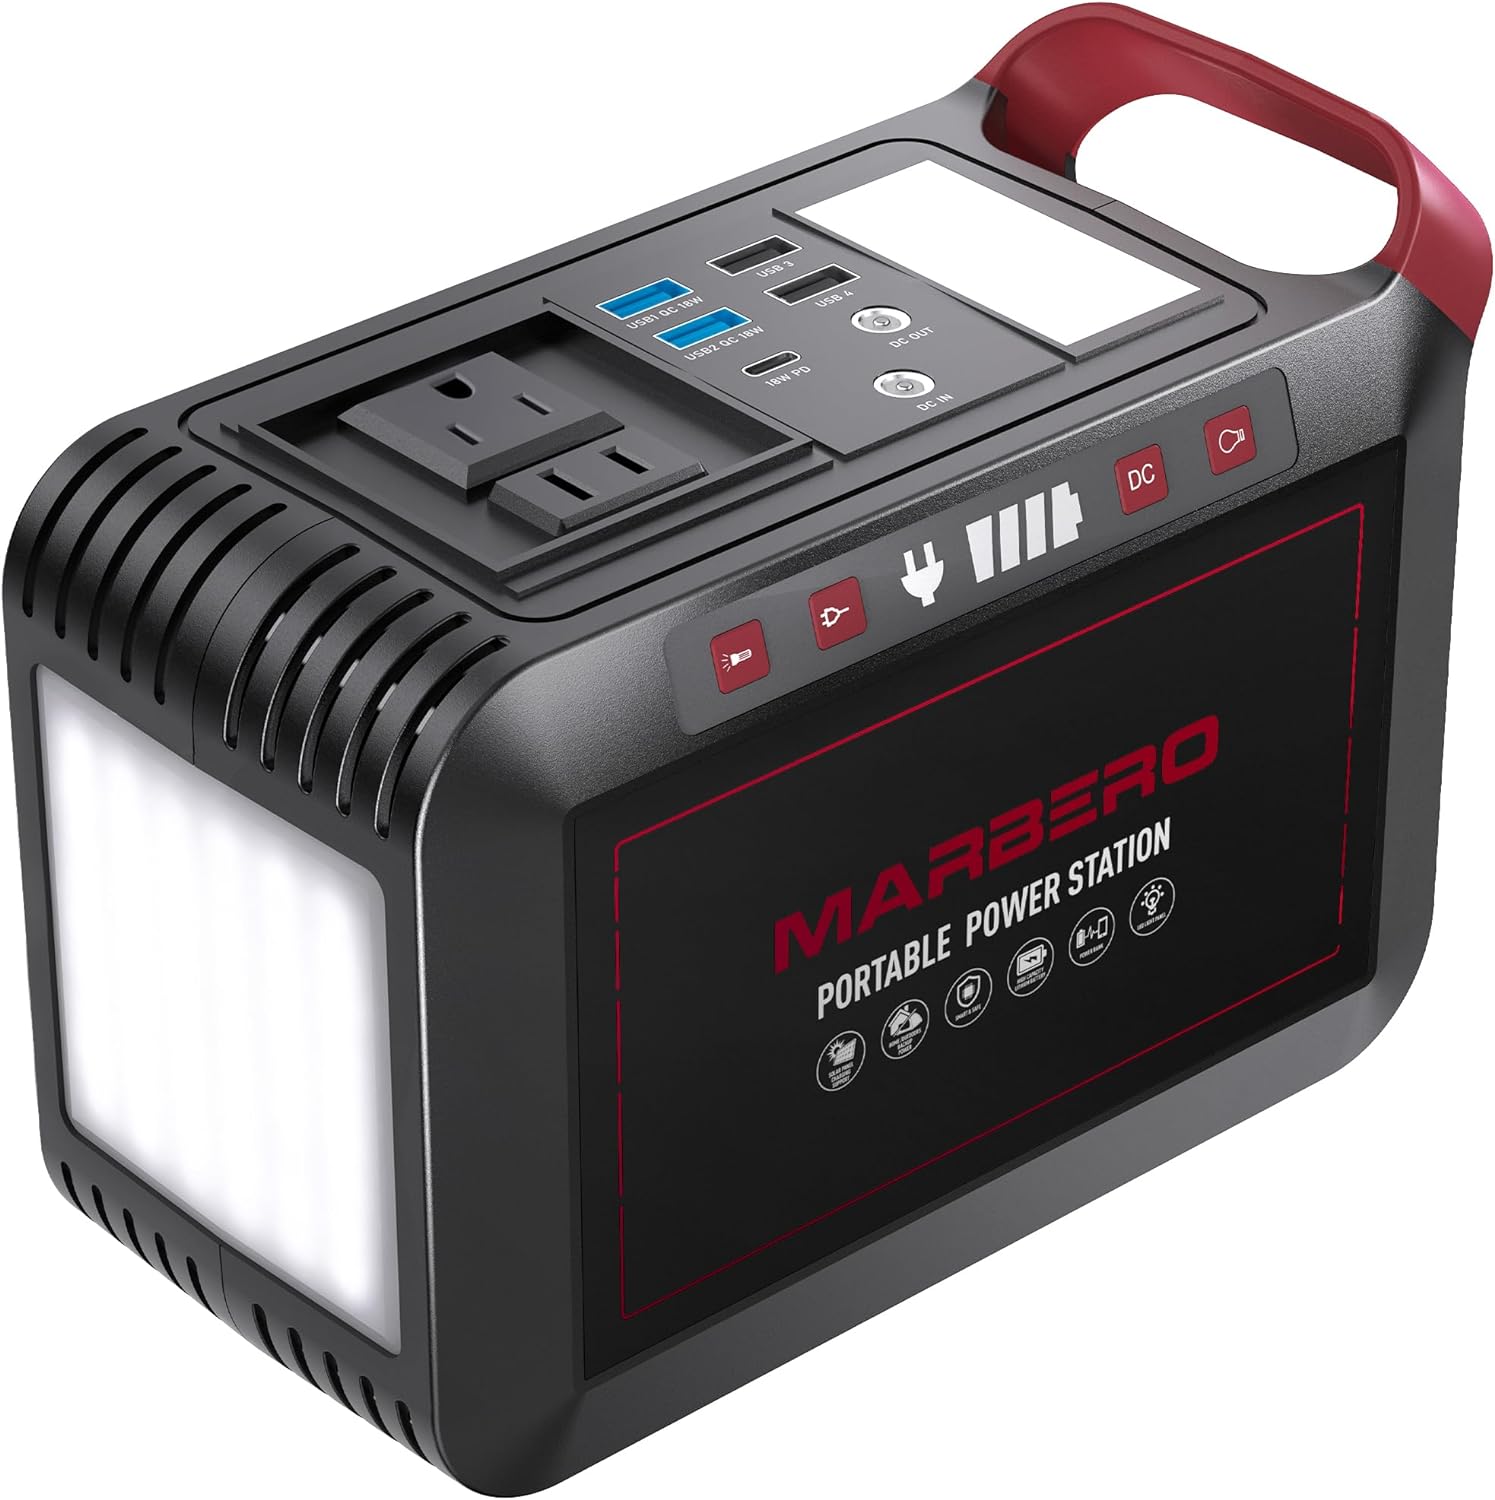 Best Price Portable Power Station